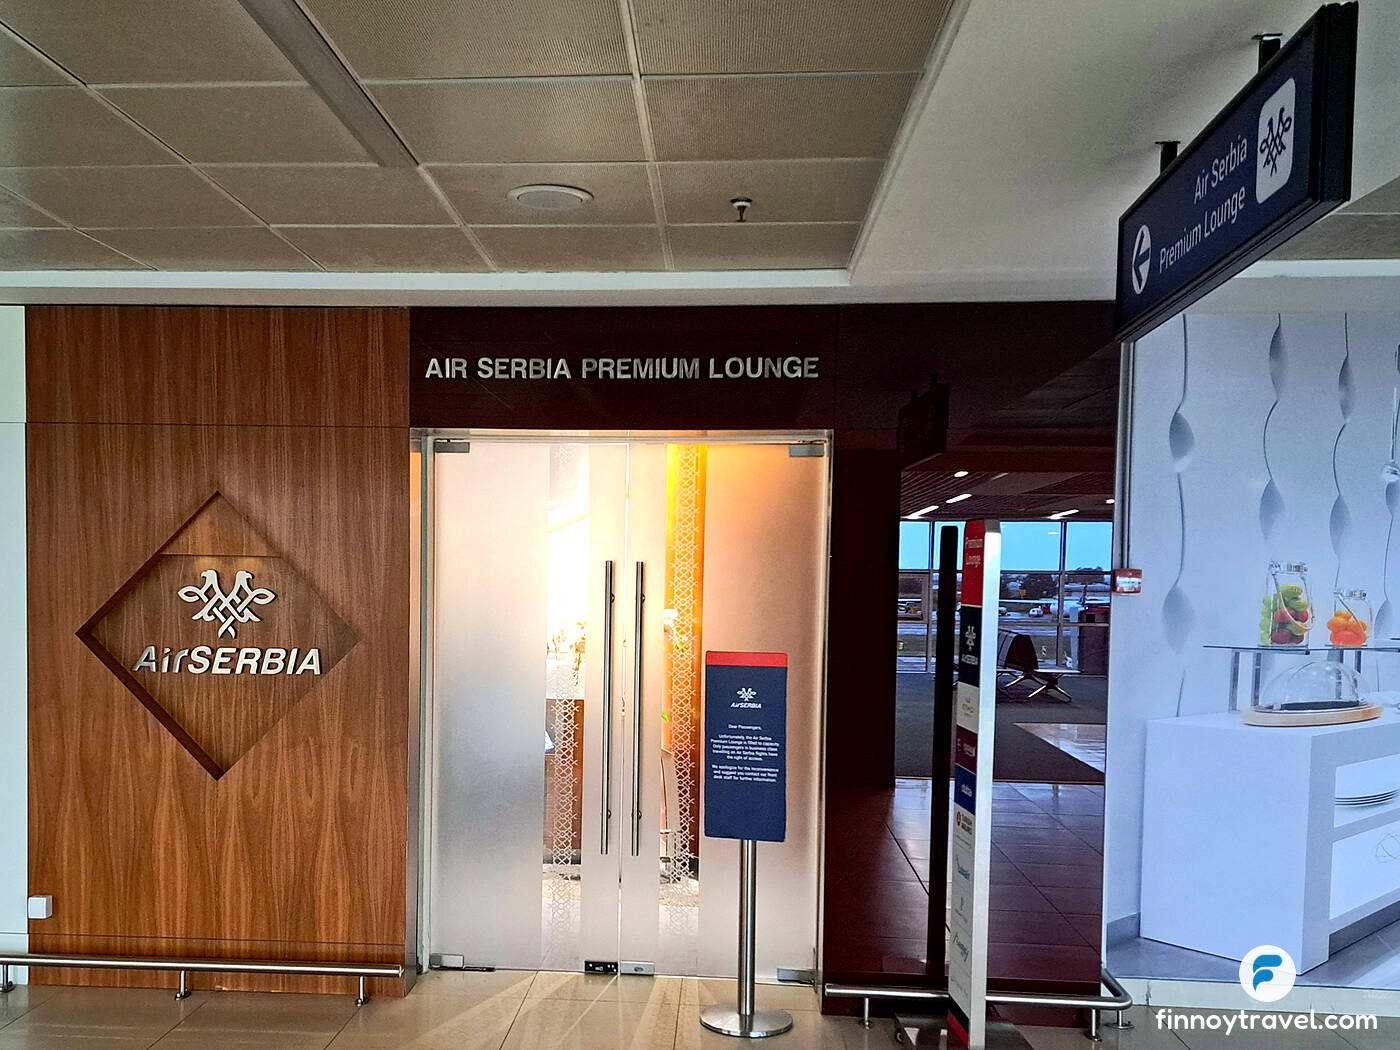 The entrance of Air Serbia Premium Lounge